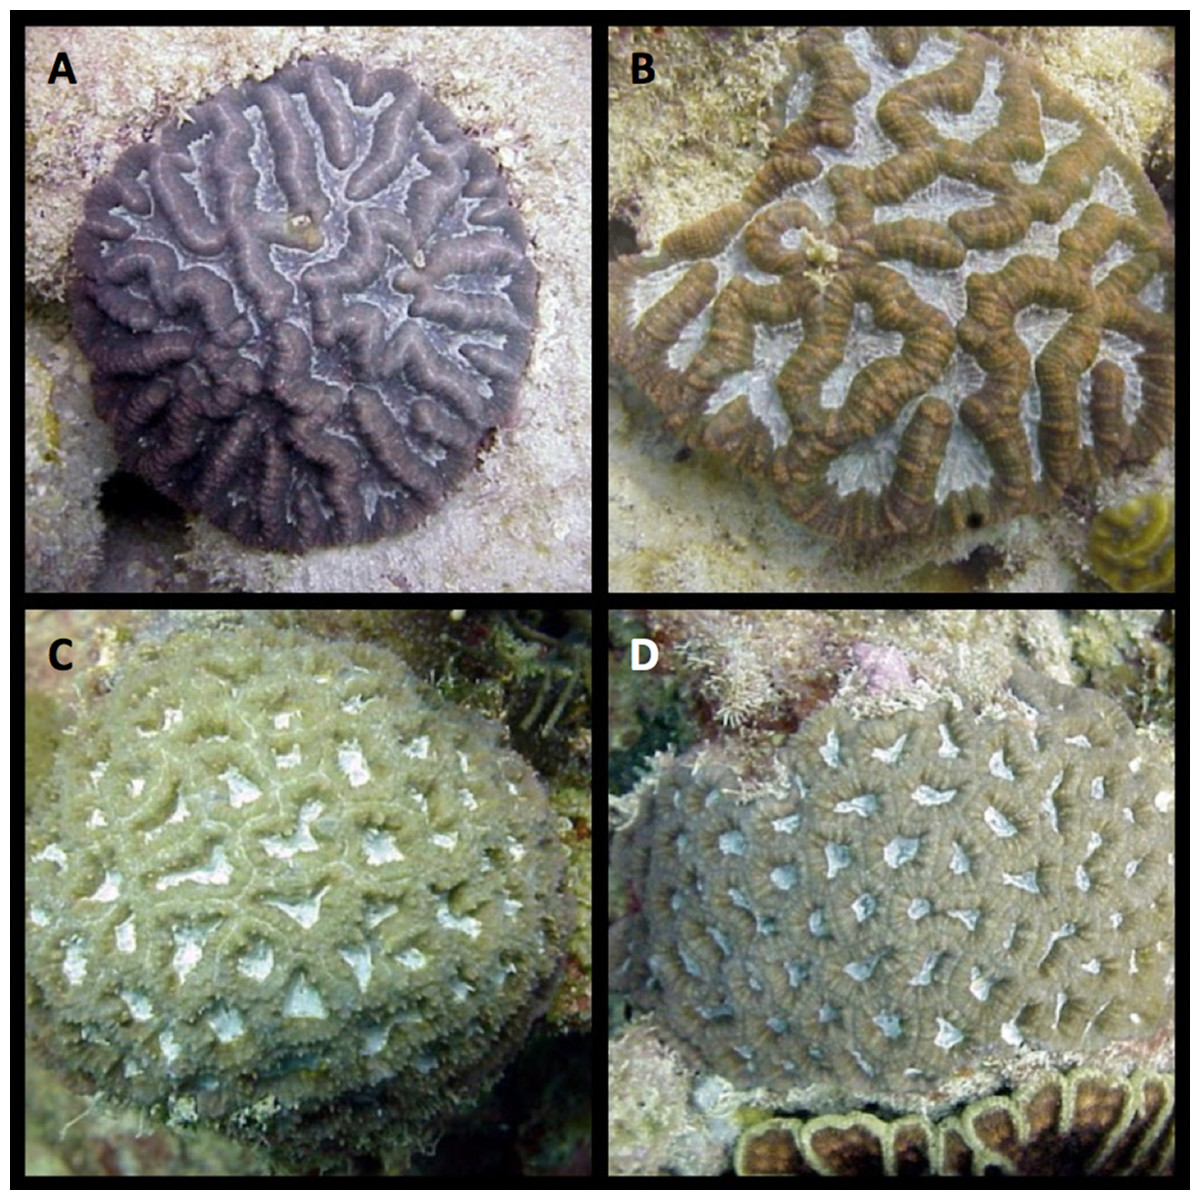 Plate showing study corals.